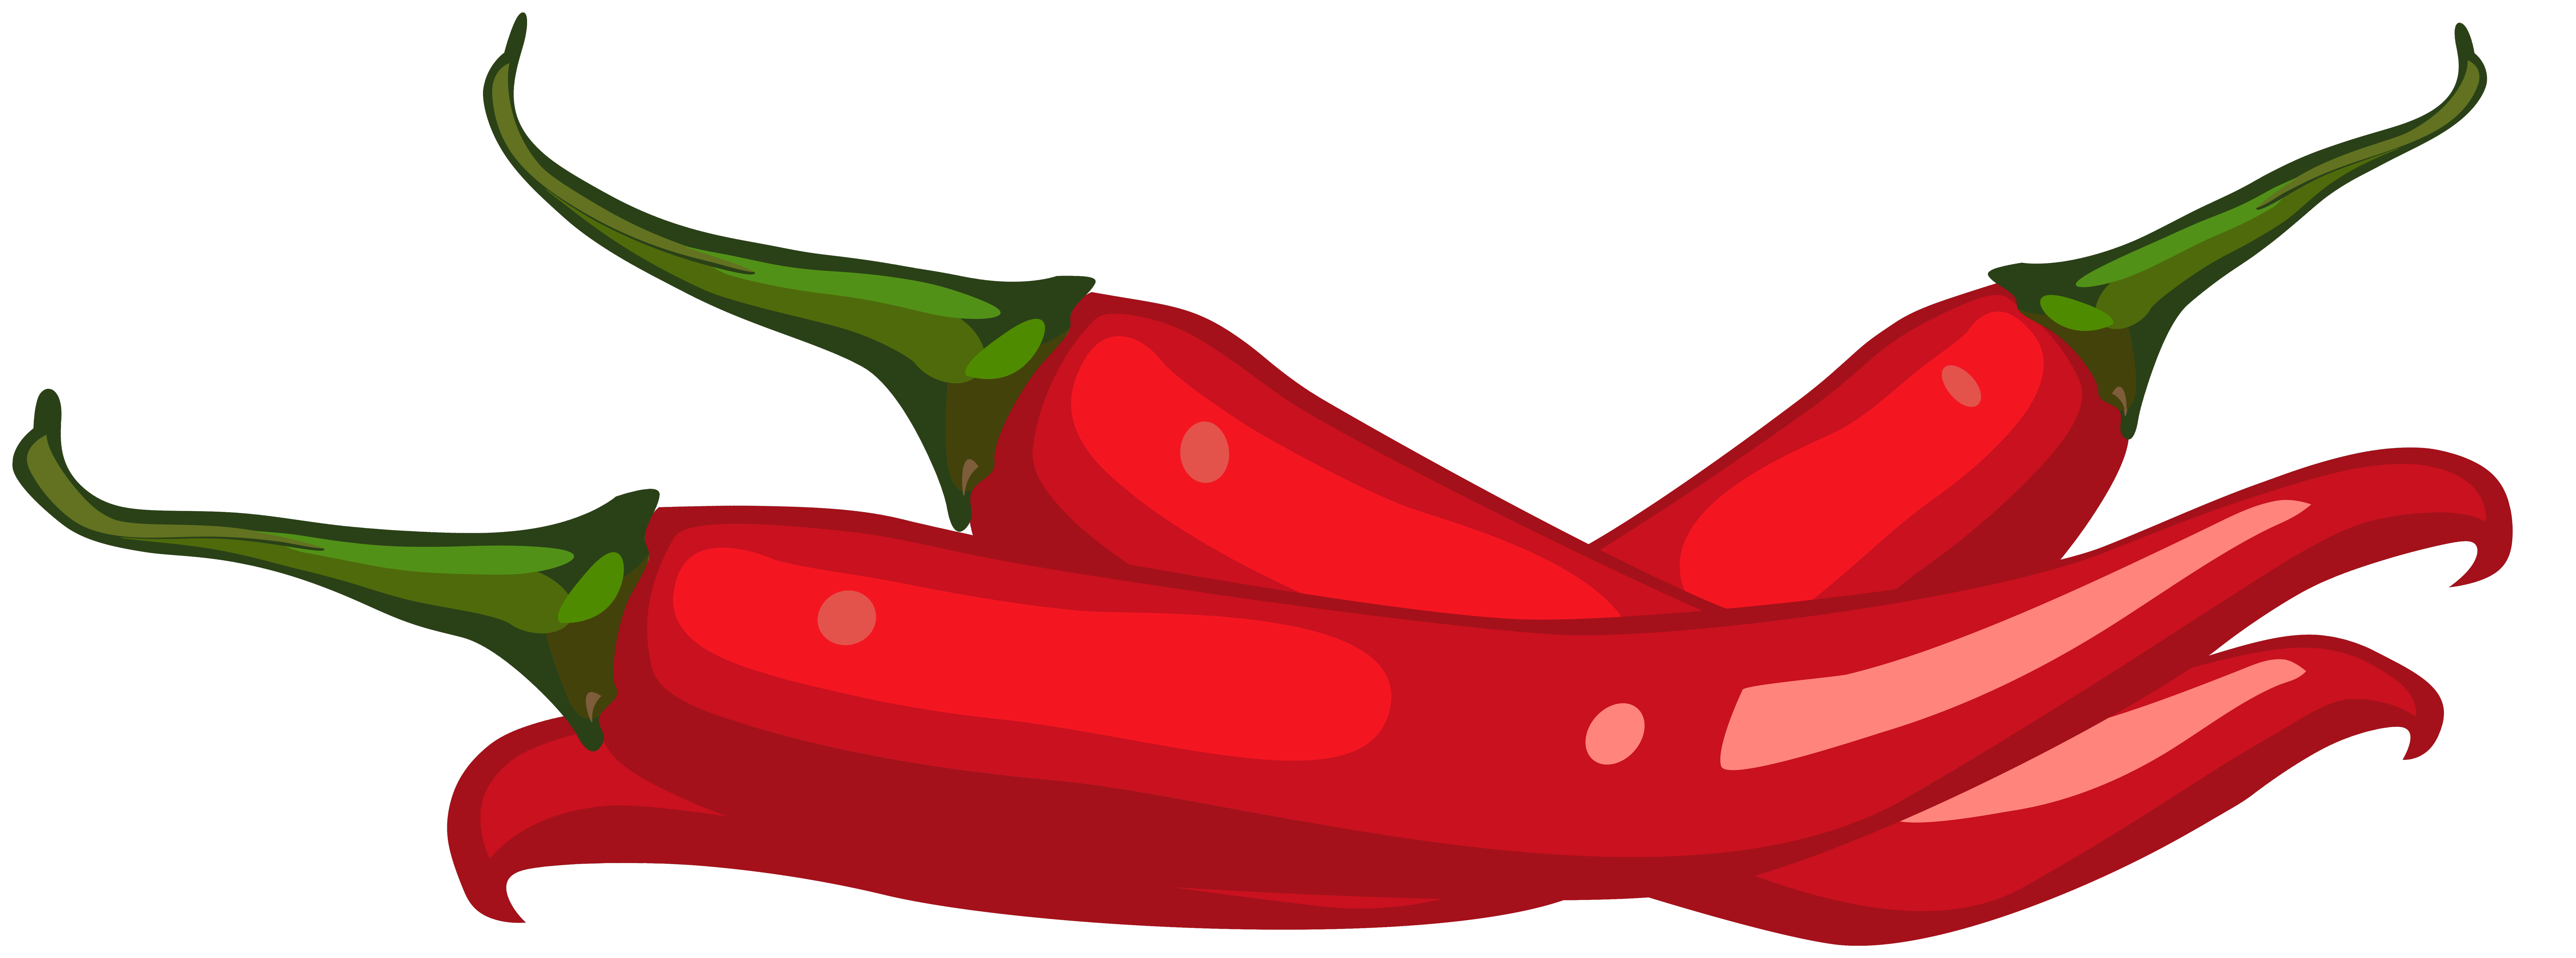 Red, Yellow, and Green Bell Peppers clipart. Free download - Clip Art ...